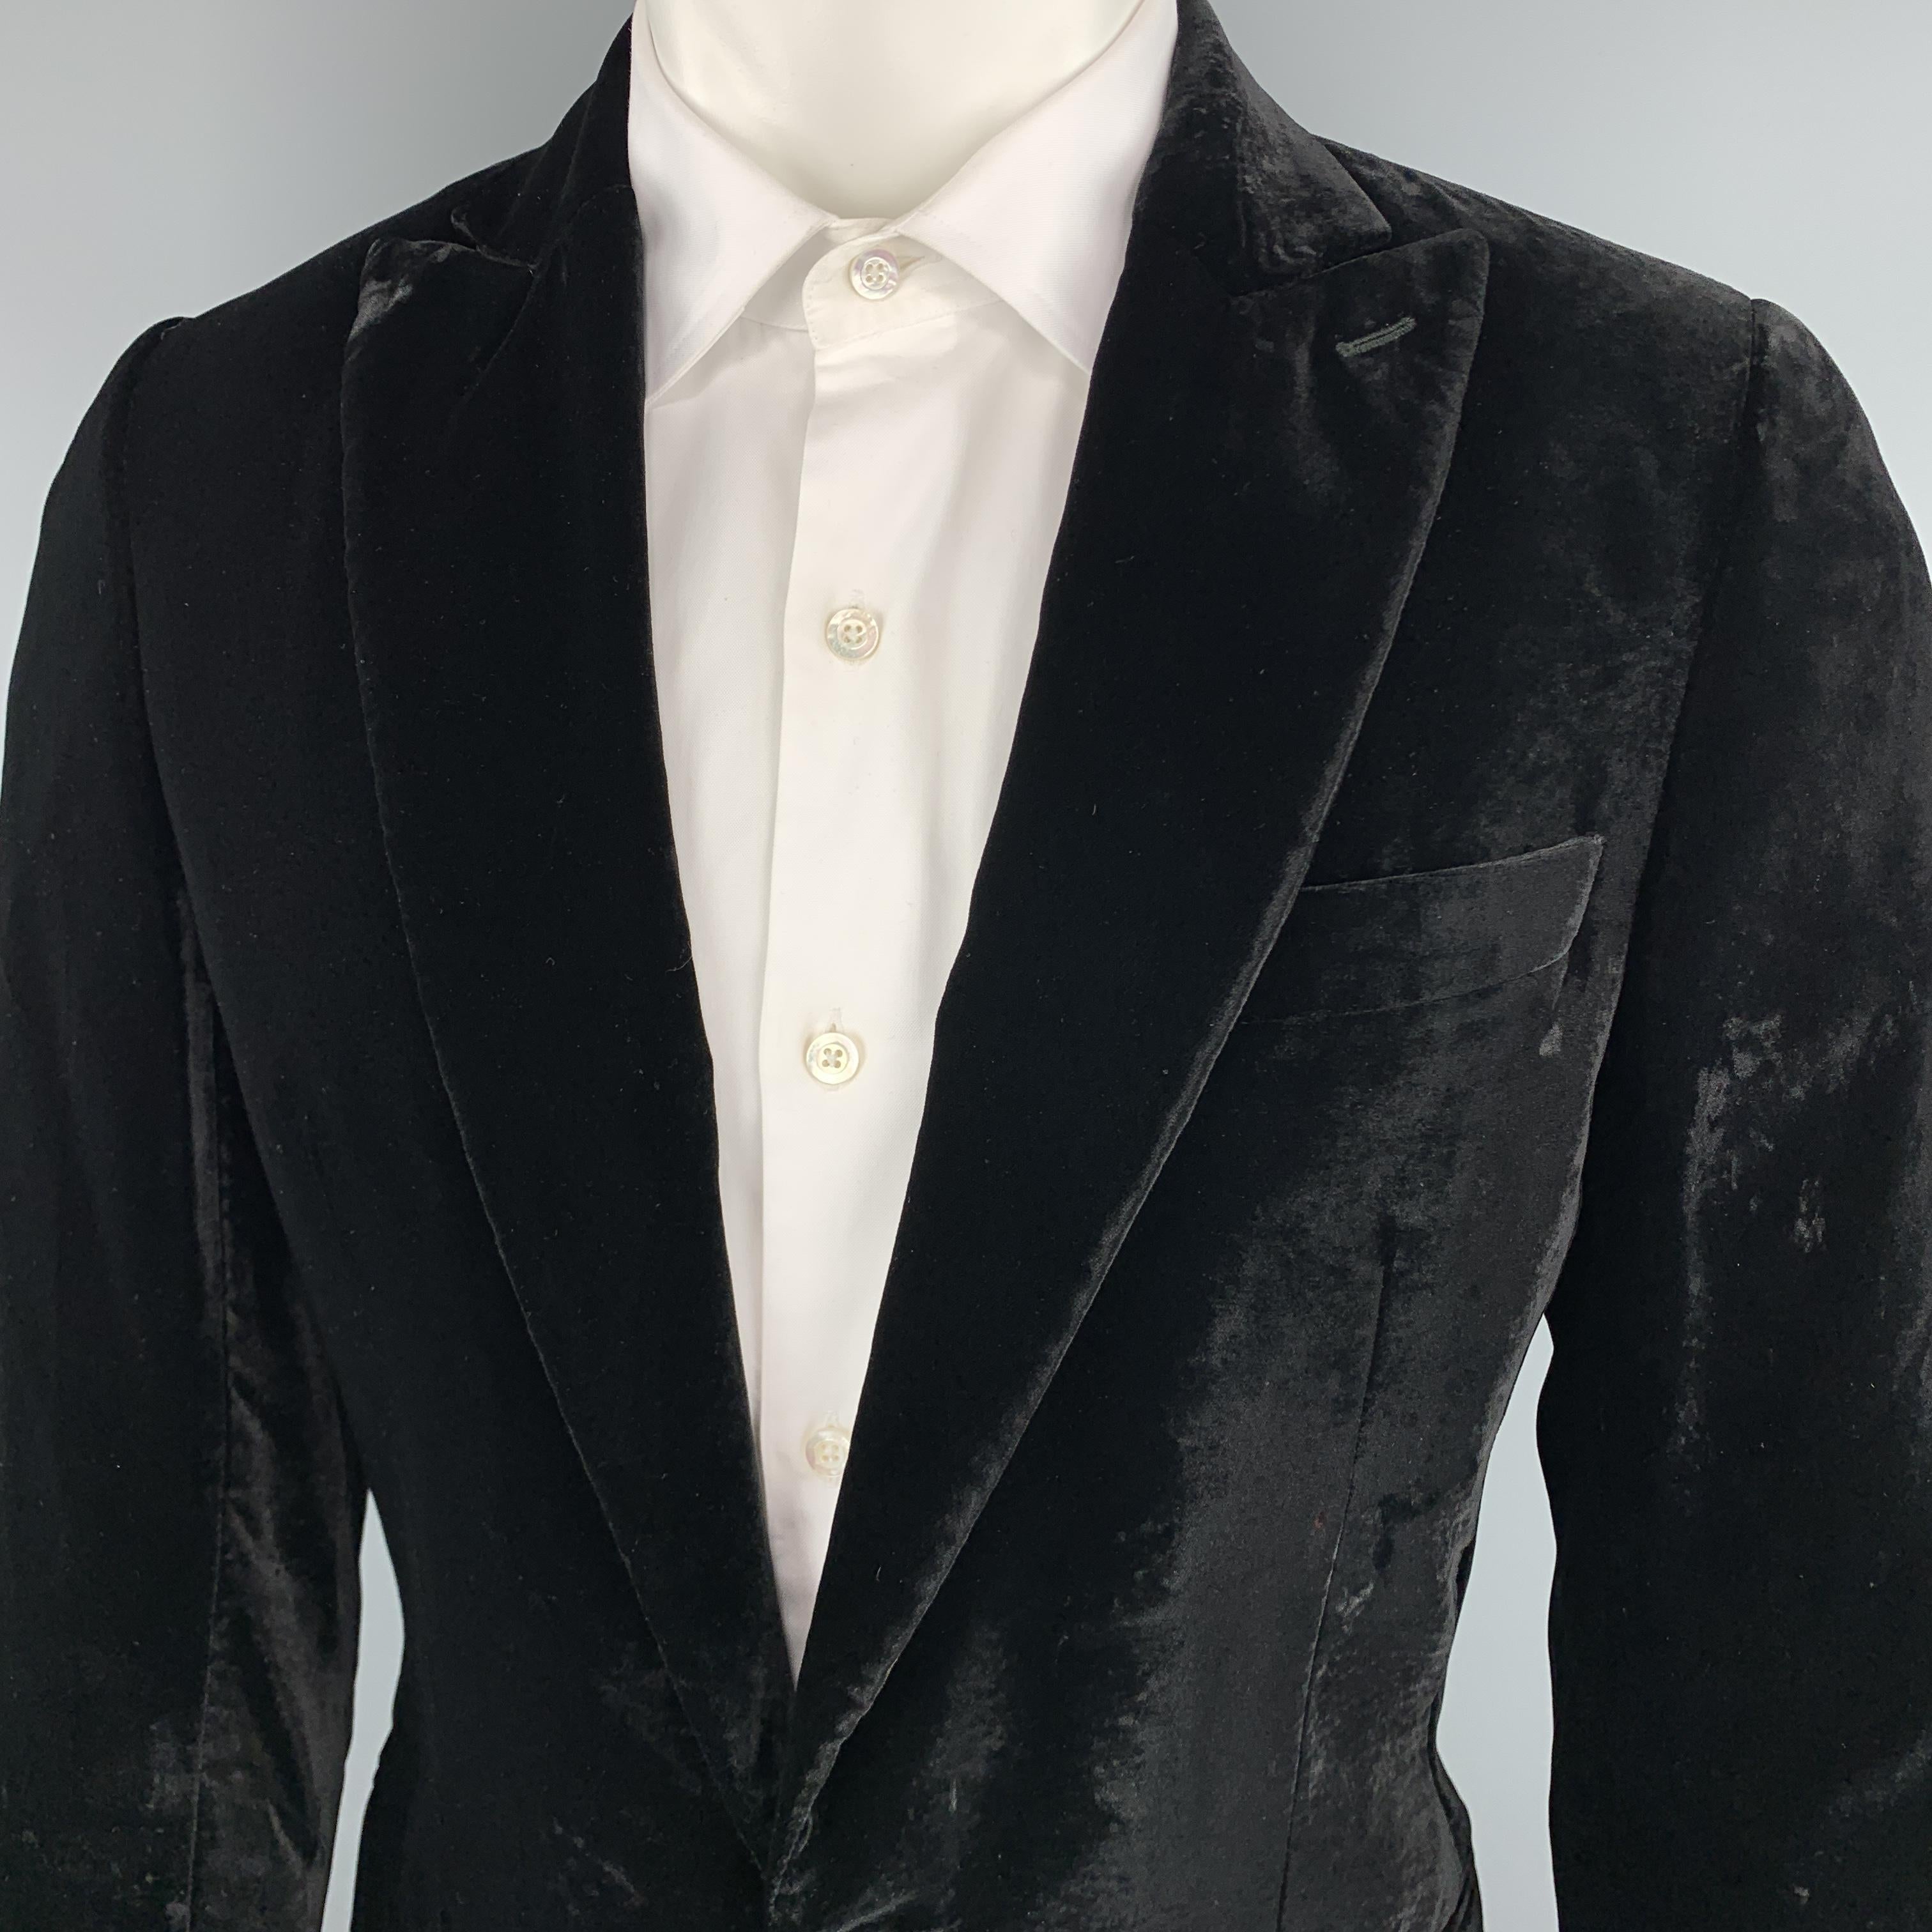 D&G by DOLCE & GABBANA sport coat comes in black velvet with a peak lapel, single breasted, two button front, and double vented back. Made in Italy.

Very Good Pre-Owned Condition.
Marked: IT 48

Measurements:

Shoulder: 17.5 in.
Chest: 42